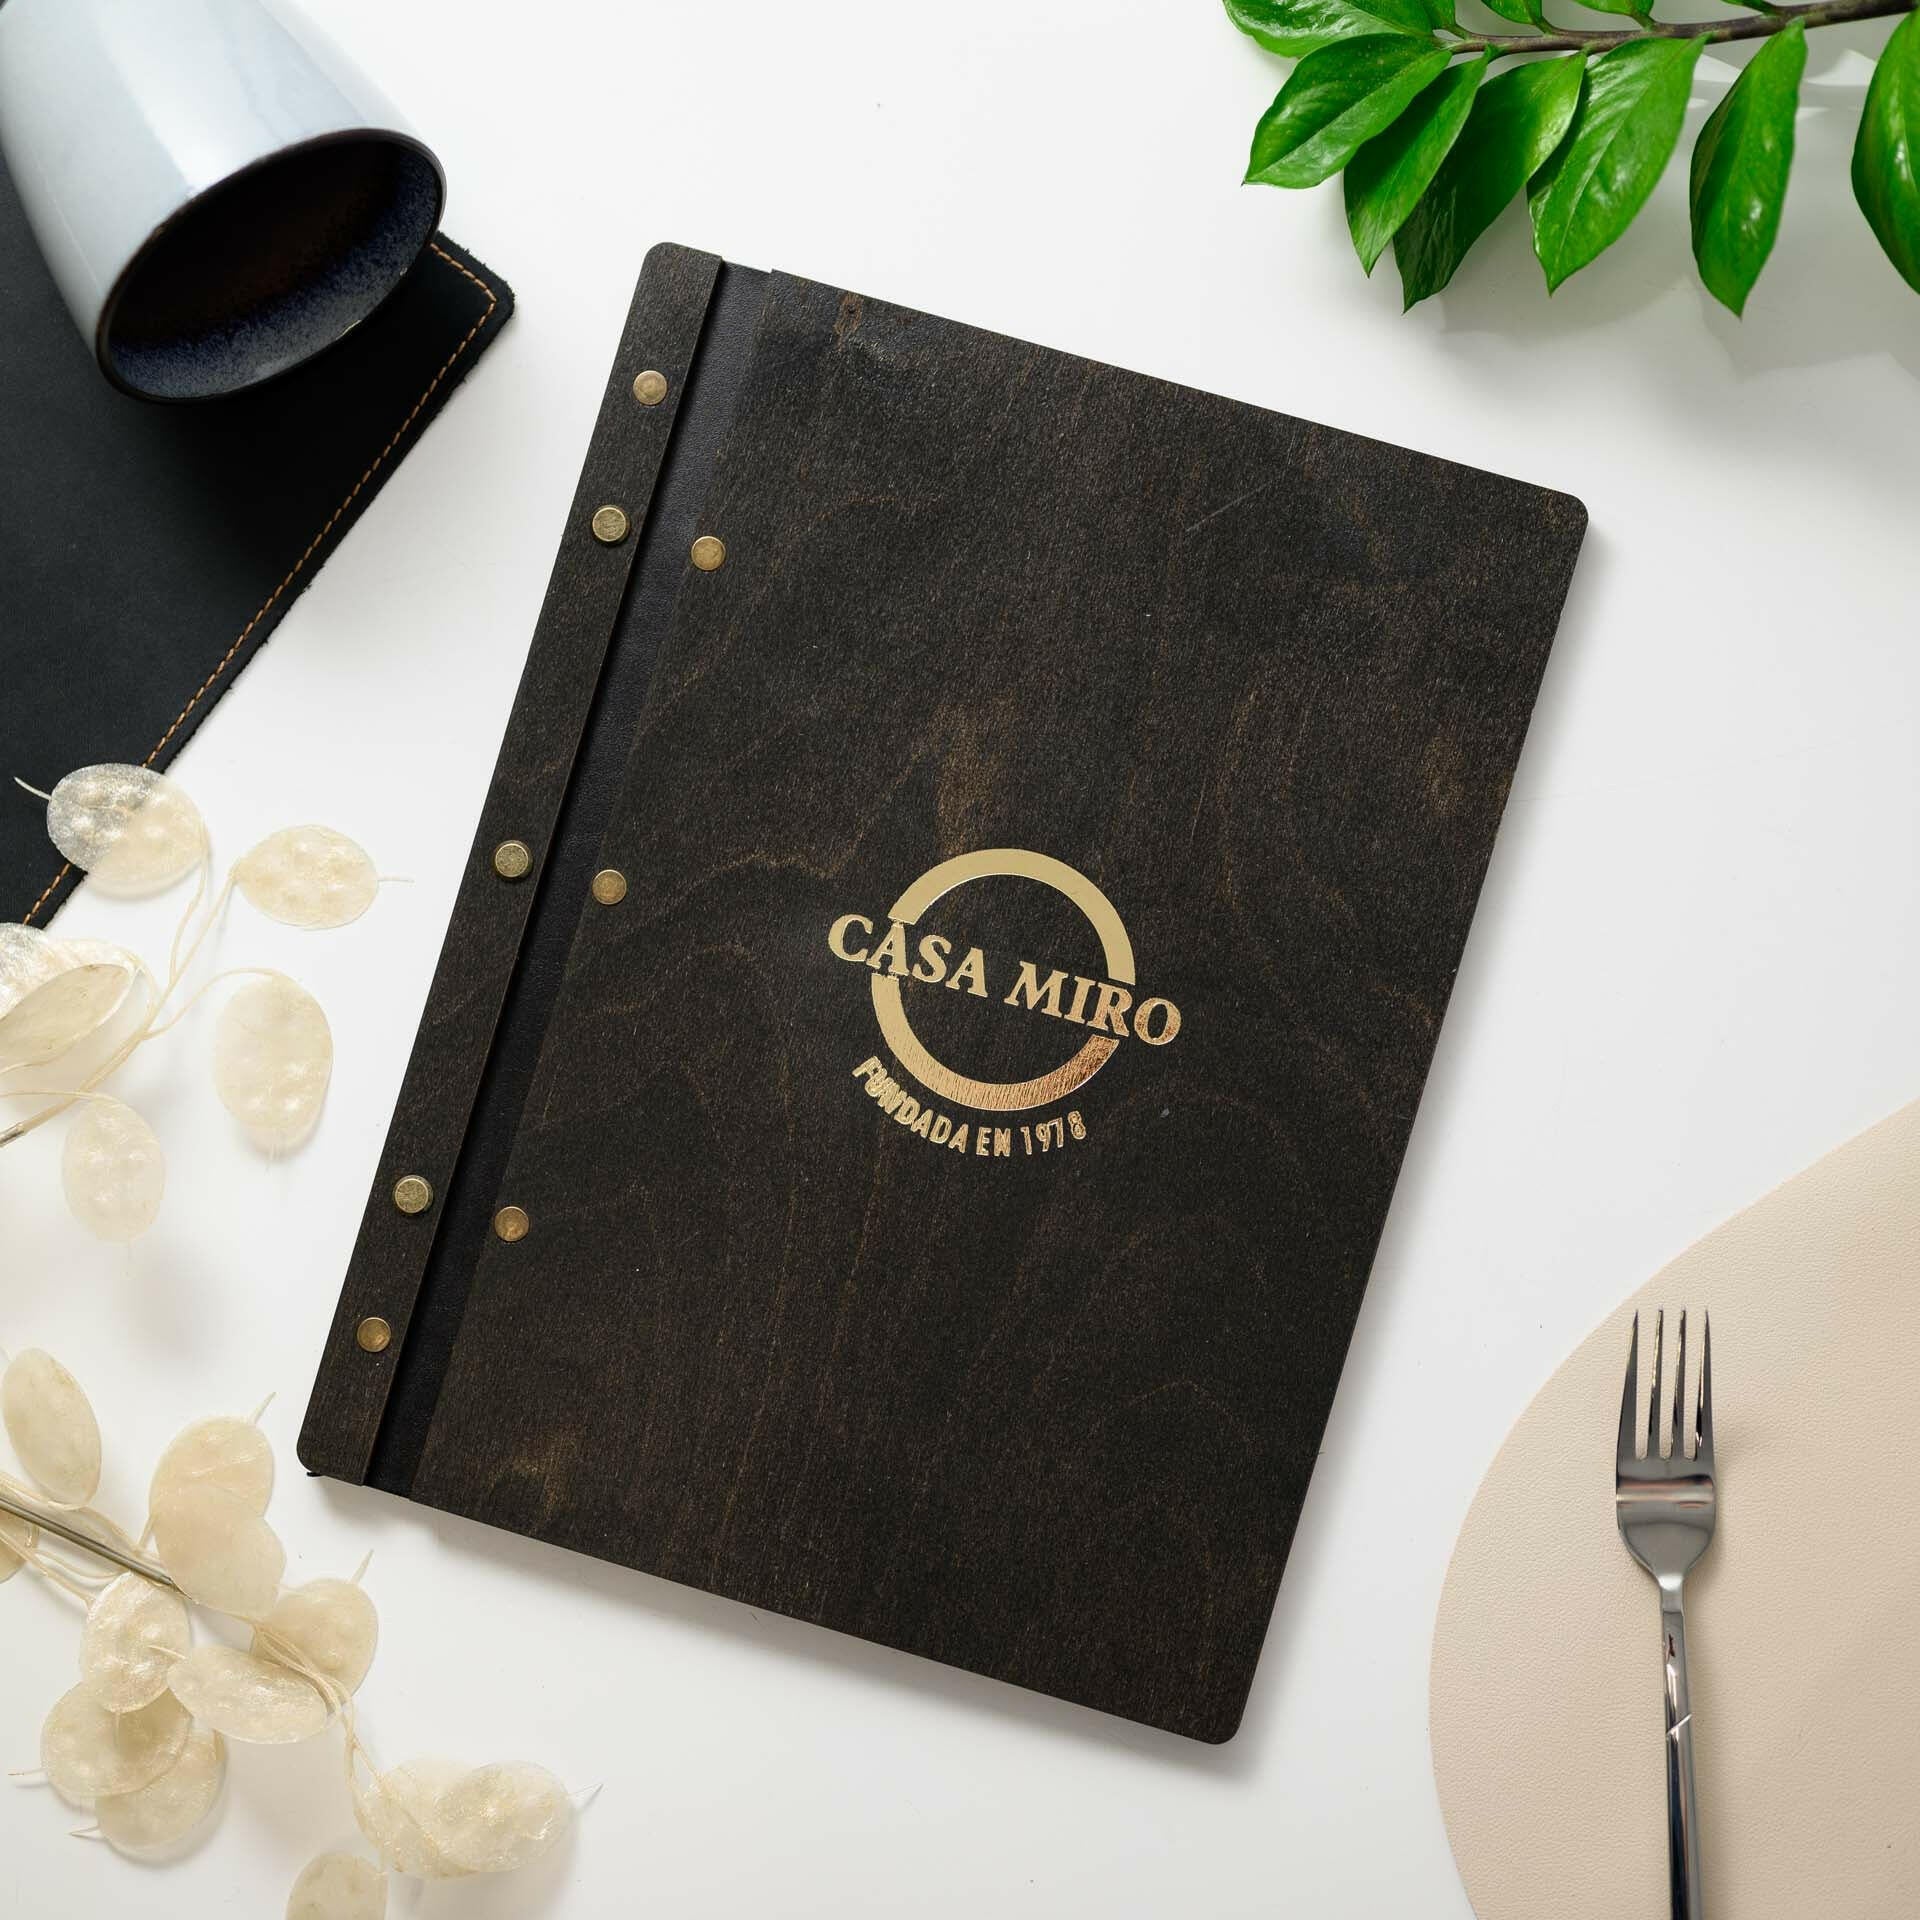 Engraved Wooden Menu Holder: Impresses diners with intricate detailing.